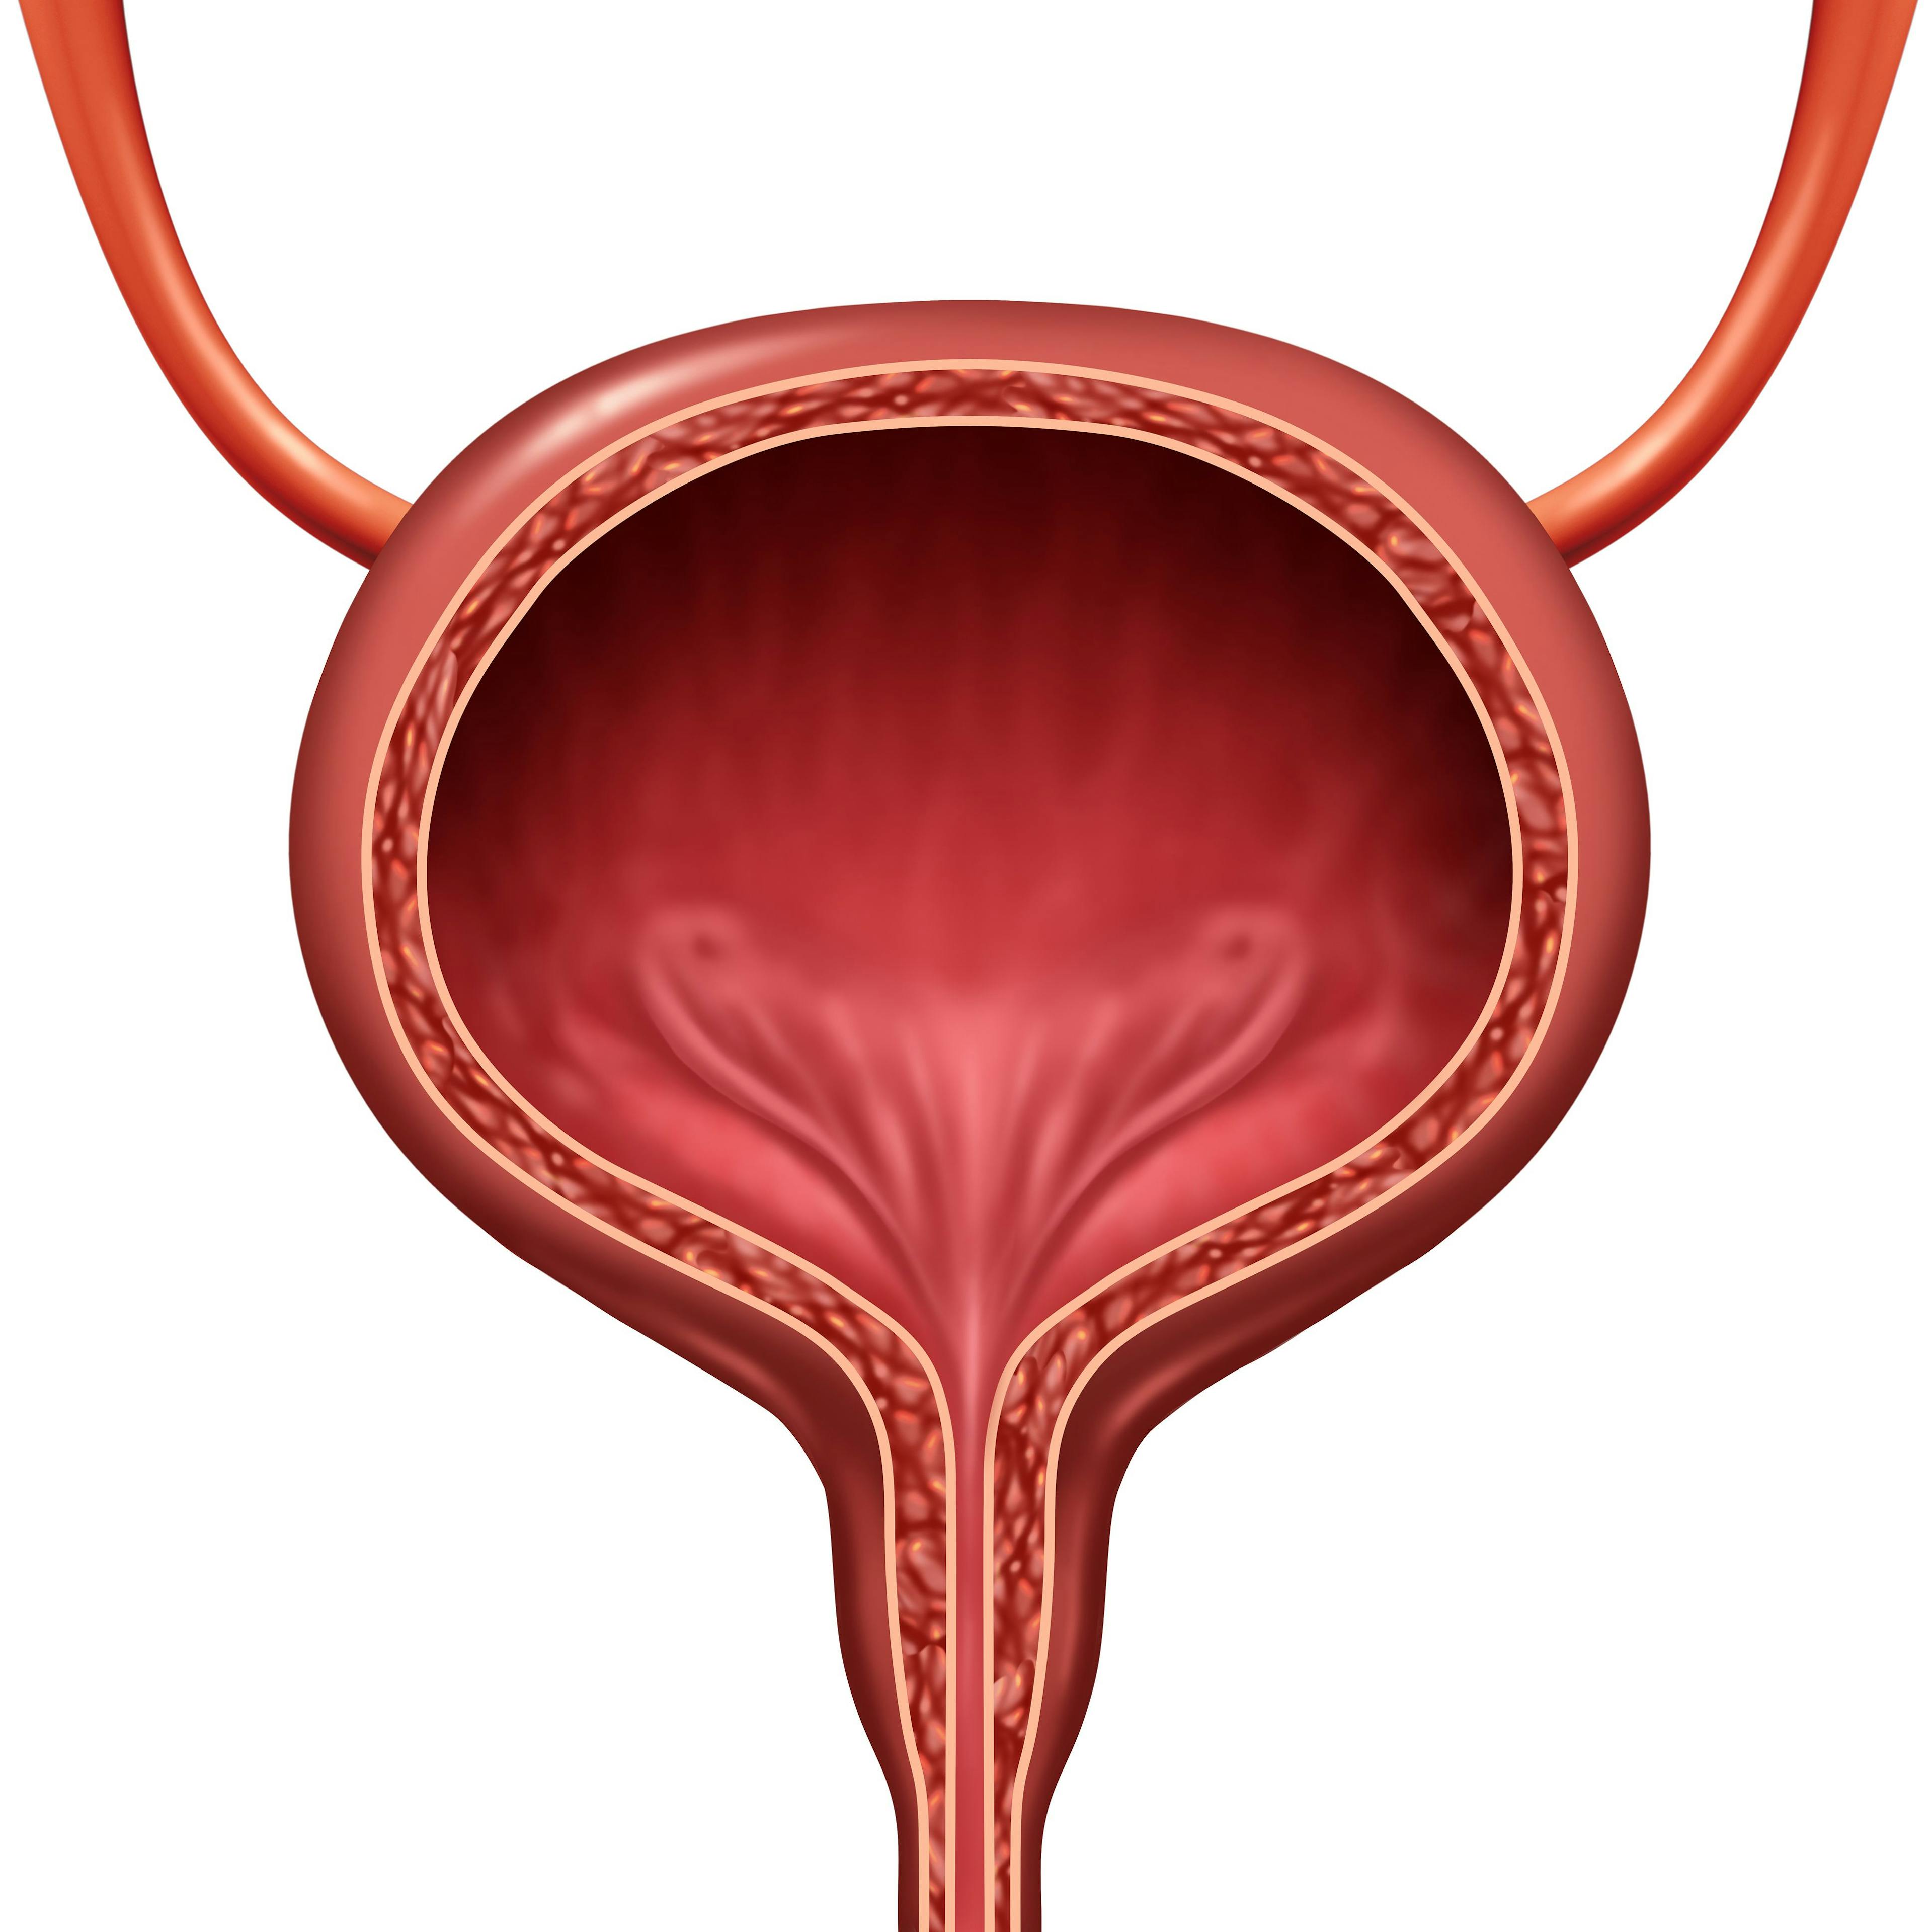 Patients with Bacillus-Calmette Guérin (BCG)–unresponsive non–muscle invasive bladder cancer experienced promising responses to treatment with of durvalumab and Vicineum, which was also well tolerated.